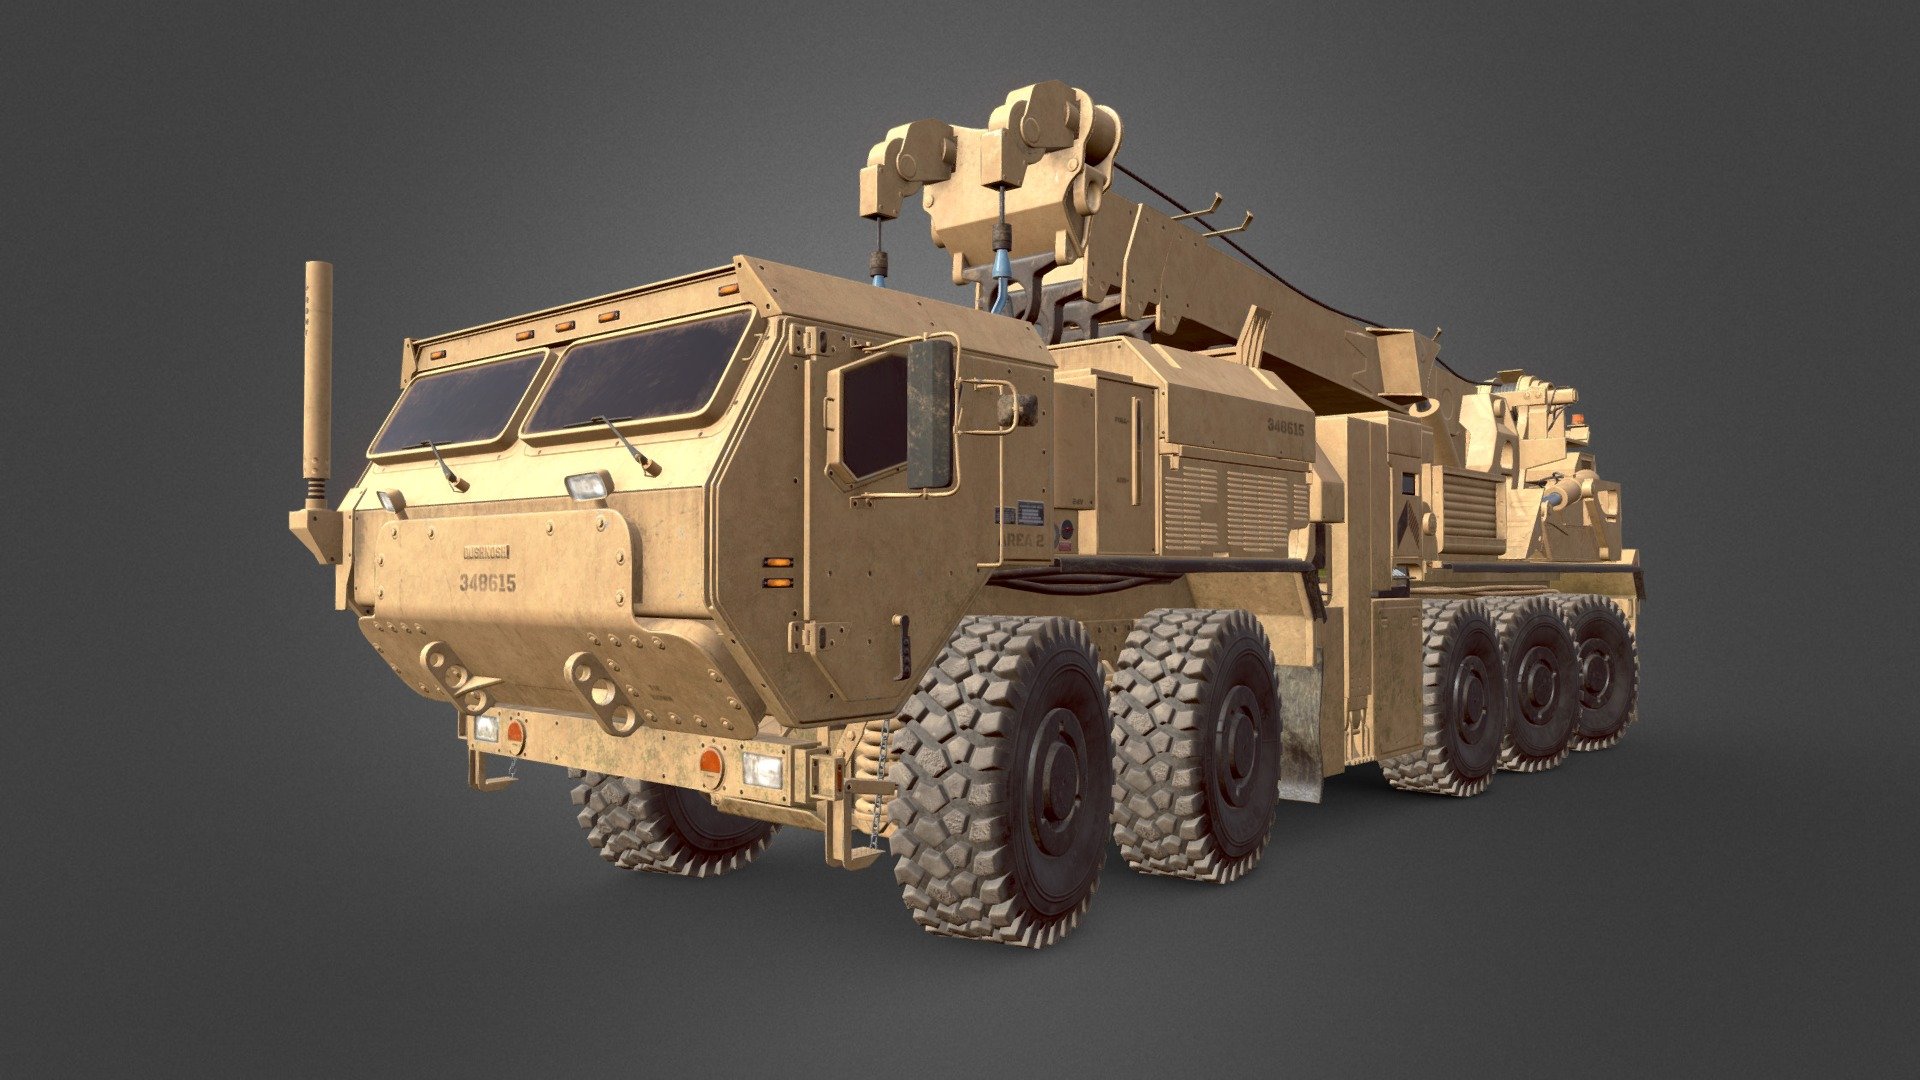 Logistics Vehicle System Replacement (LVSR) is a family of a heavy-duty military logistics vehicles of the USMC, in service since 2009.
This particular 3D model is based off of one of the LVSR variants - Multi-Mission Recovery System (MMRS), whose main feature is an autocrane, capabale of lift and recovery of heavy vehicles.
Gameready model that I made for Unity indie project, using AAA game-ready PBR metal-rough pipeline 3d model